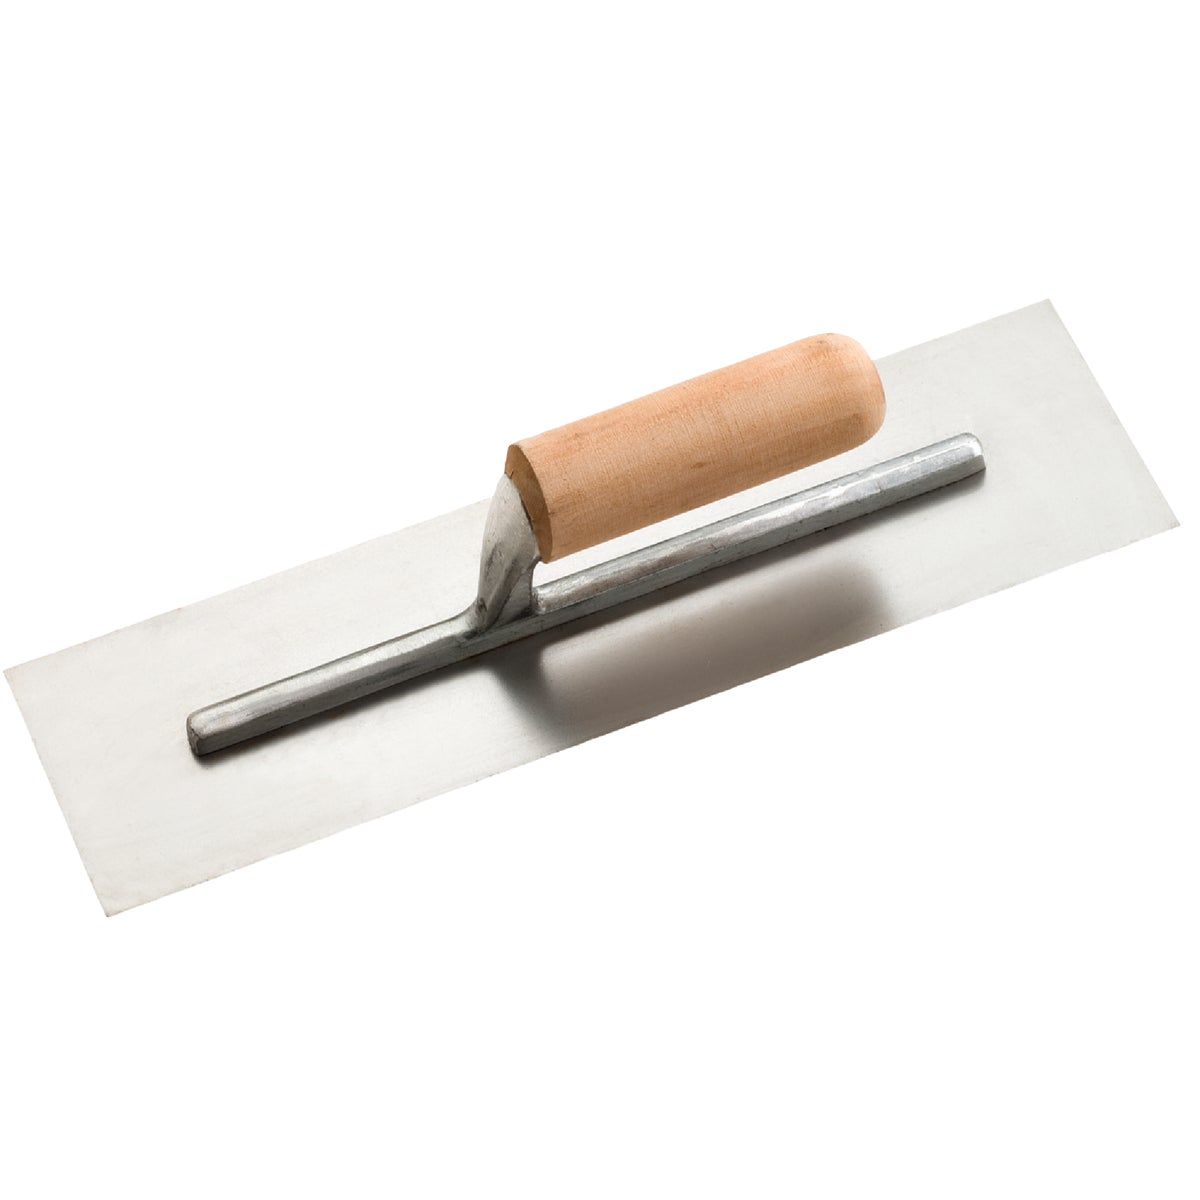 Do it 4 In. x 14 In. Finishing Trowel with Basswood Handle